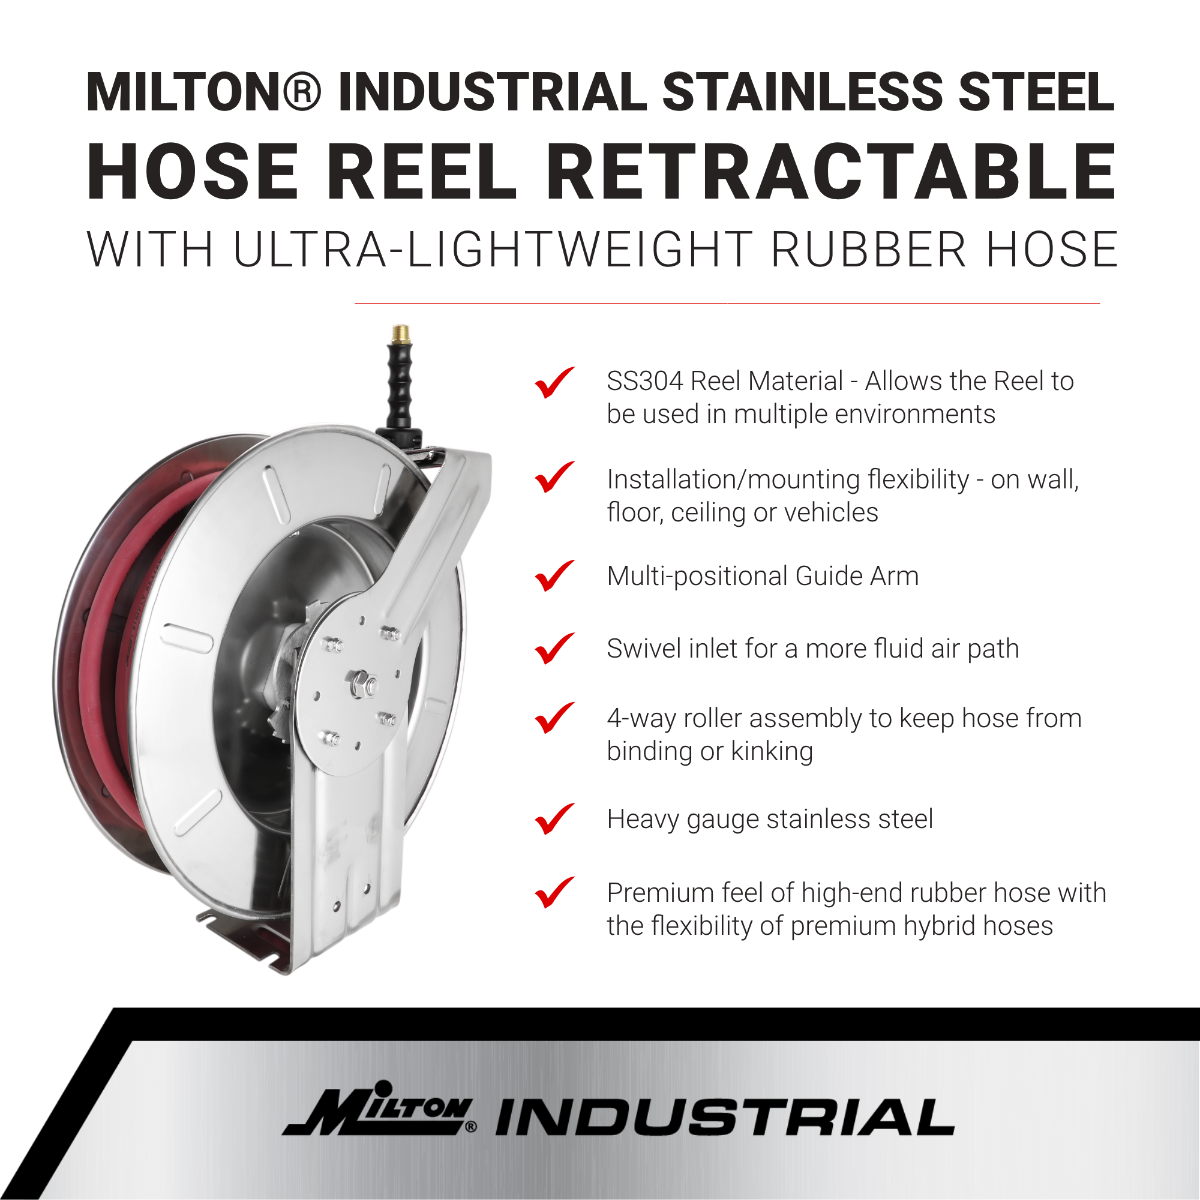 Milton Stainless Steel Hose Reel Retractable, 1/2 ID x 35' Ultra